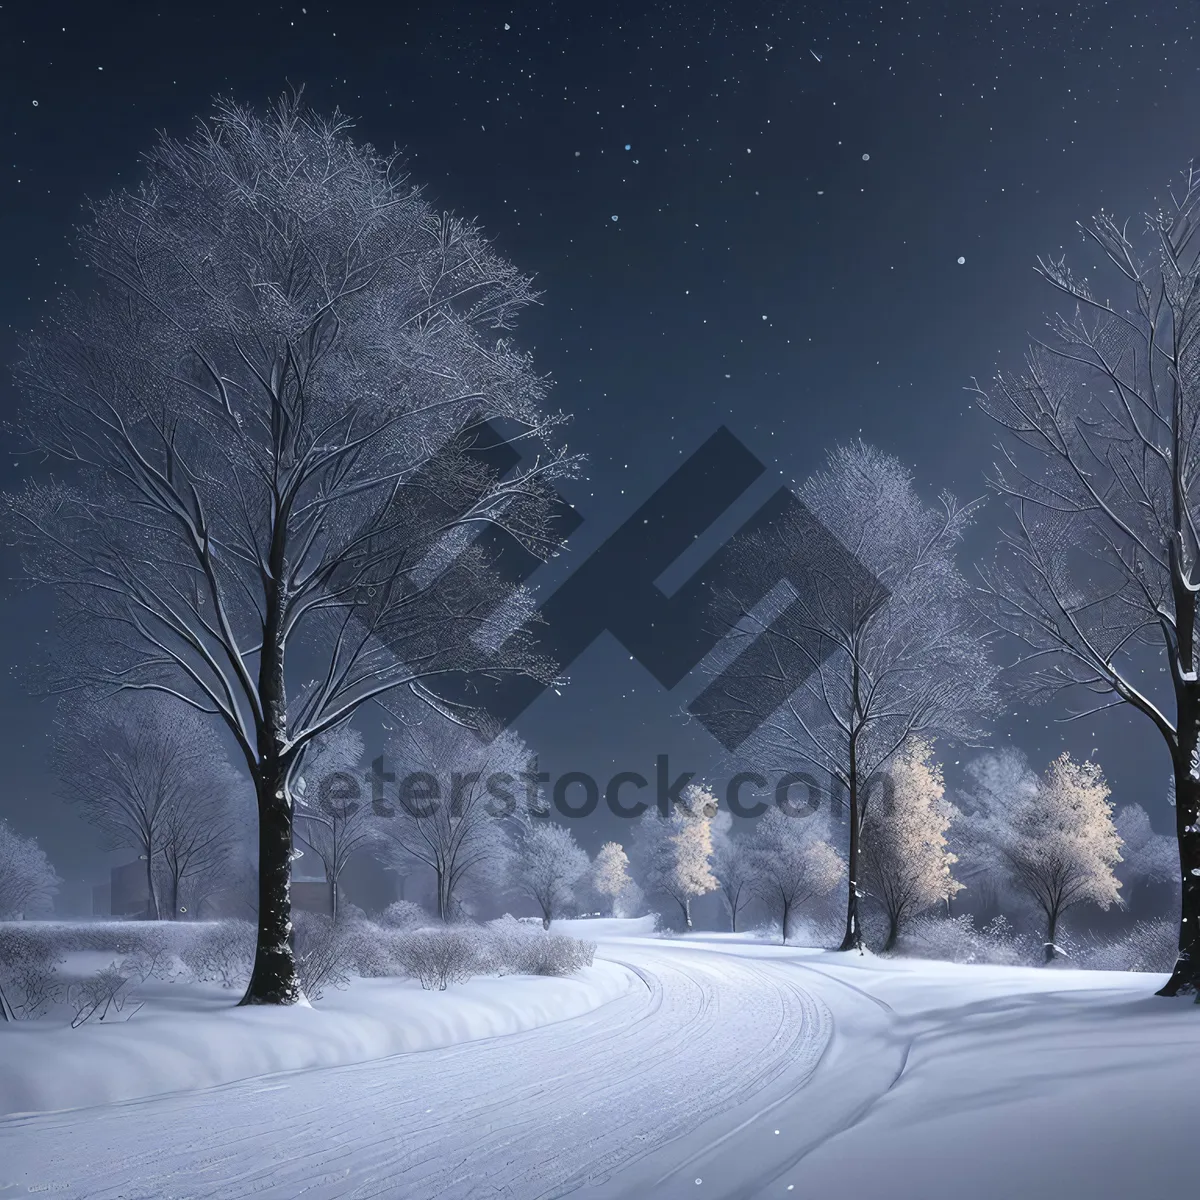 Picture of Winter Wonderland: Serene Frost-Covered Landscape Amidst Snowy Forest.